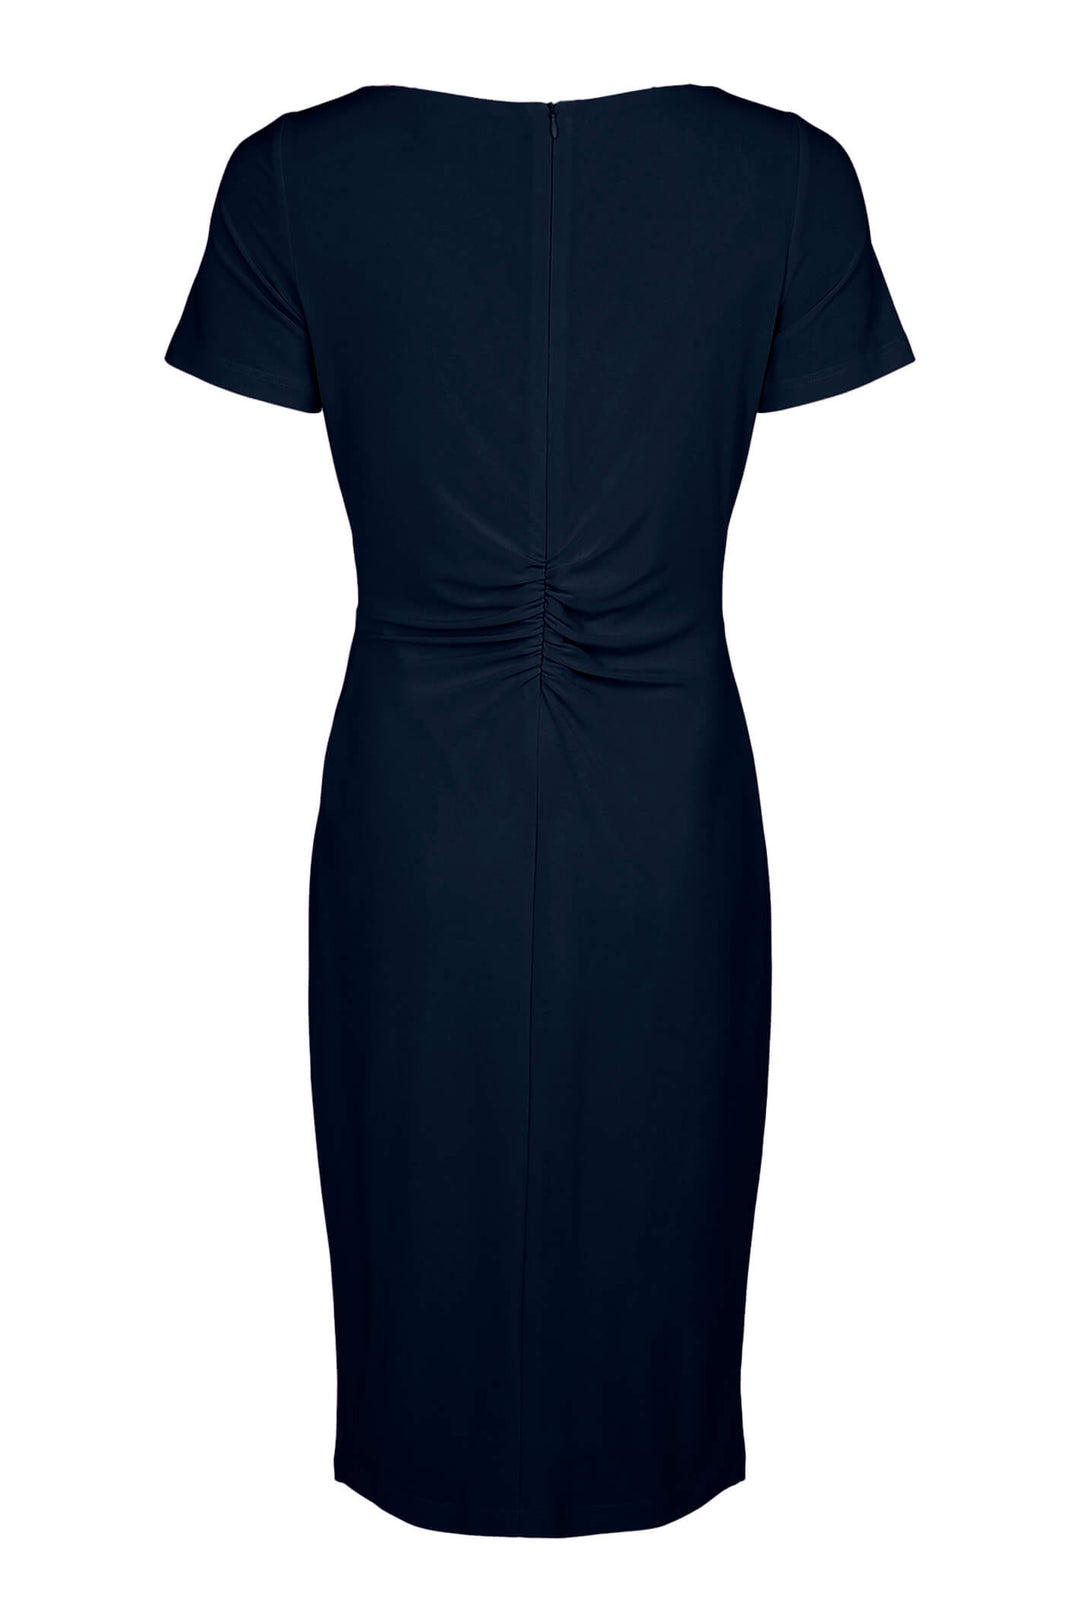 Tia 78409 Navy Ruched Dress - Experience Boutique